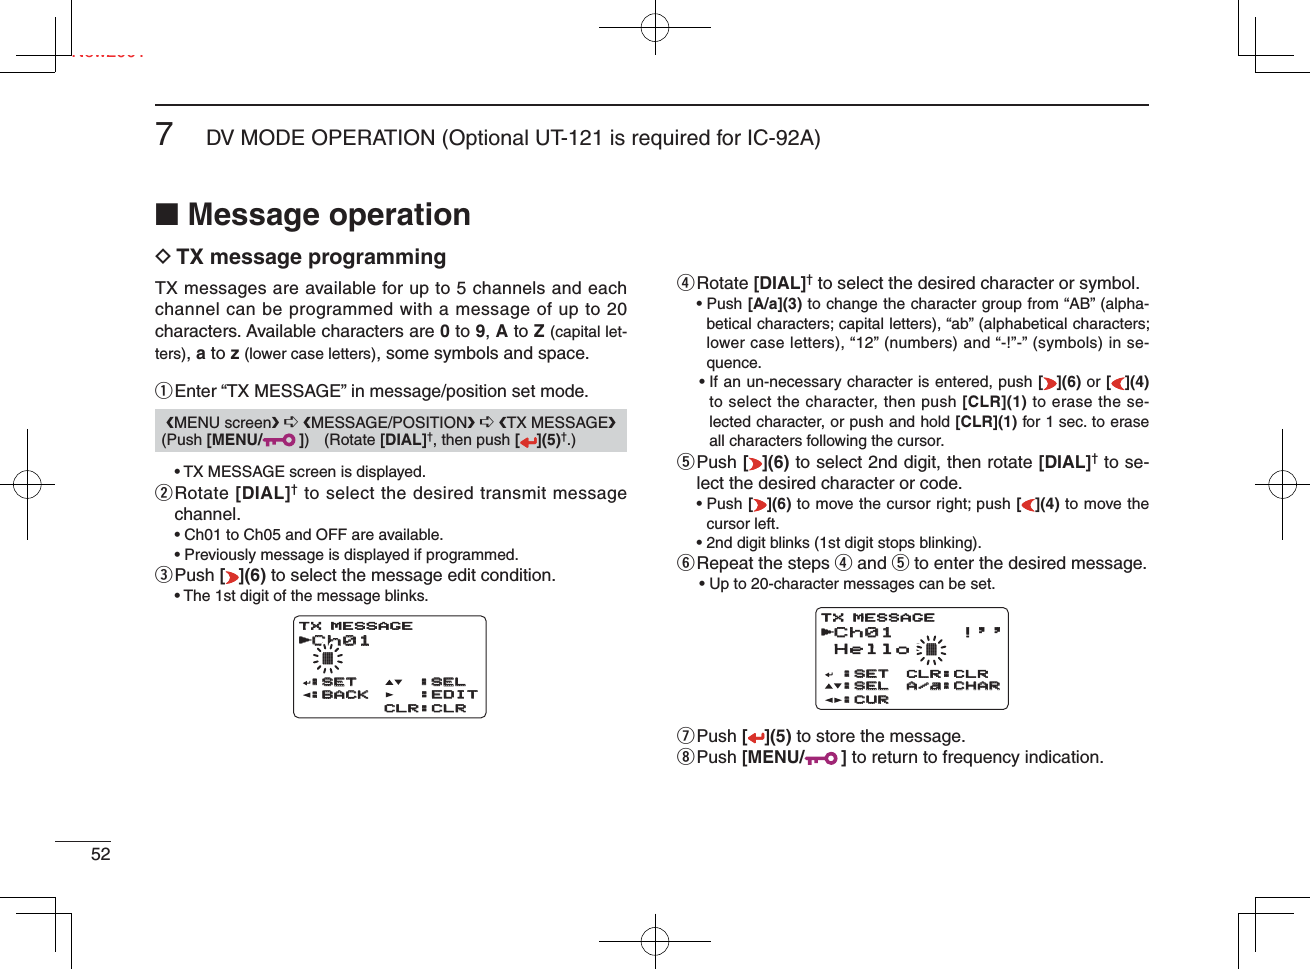 Ne527DV MODE OPERATION (Optional UT-121 is required for IC-92A)New2001■ Message operationD TX message programmingTX messages are available for up to 5 channels and each channel can be programmed with a message of up to 20 characters. Available characters are 0 to 9, A to Z (capital let-ters), a to z (lower case letters), some symbols and space.q Enter “TX MESSAGE” in message/position set mode.  • TX MESSAGE screen is displayed.w  Rotate [DIAL]† to select the desired transmit message channel.  • Ch01 to Ch05 and OFF are available.  • Previously message is displayed if programmed.e Push  [ ](6) to select the message edit condition.  • The 1st digit of the message blinks.r Rotate  [DIAL]† to select the desired character or symbol. •  Push [A/a](3) to change the character group from “AB” (alpha-betical characters; capital letters), “ab” (alphabetical characters; lower case letters), “12” (numbers) and “-!”-” (symbols) in se-quence. •  If an un-necessary character is entered, push [](6) or [](4) to select the character, then push [CLR](1) to erase the se-lected character, or push and hold [CLR](1) for 1 sec. to erase all characters following the cursor.t  Push [ ](6) to select 2nd digit, then rotate [DIAL]† to se-lect the desired character or code. •  Push [](6) to move the cursor right; push [](4) to move the cursor left.  • 2nd digit blinks (1st digit stops blinking).y Repeat the steps r and t to enter the desired message.  • Up to 20-character messages can be set.u Push  [ ](5) to store the message.i Push  [MENU/ ] to return to frequency indication.❮MENU screen❯ ➪ ❮MESSAGE/POSITION❯ ➪ ❮TX MESSAGE❯ (Push [MENU/ ]) (Rotate [DIAL]†, then push [ ](5)†.)Ch01Ch01 †:SET:SET:SEL:SEL:BACK:BACKCLR:CLRCLR:CLRTX MESSAGE:EDIT:EDITrCh01Ch01 !&apos;&apos;Hello!†:SET:SET:SEL:SEL:CUR:CURCLR:CLRA/a:CHARA/a:CHARTX MESSAGEr